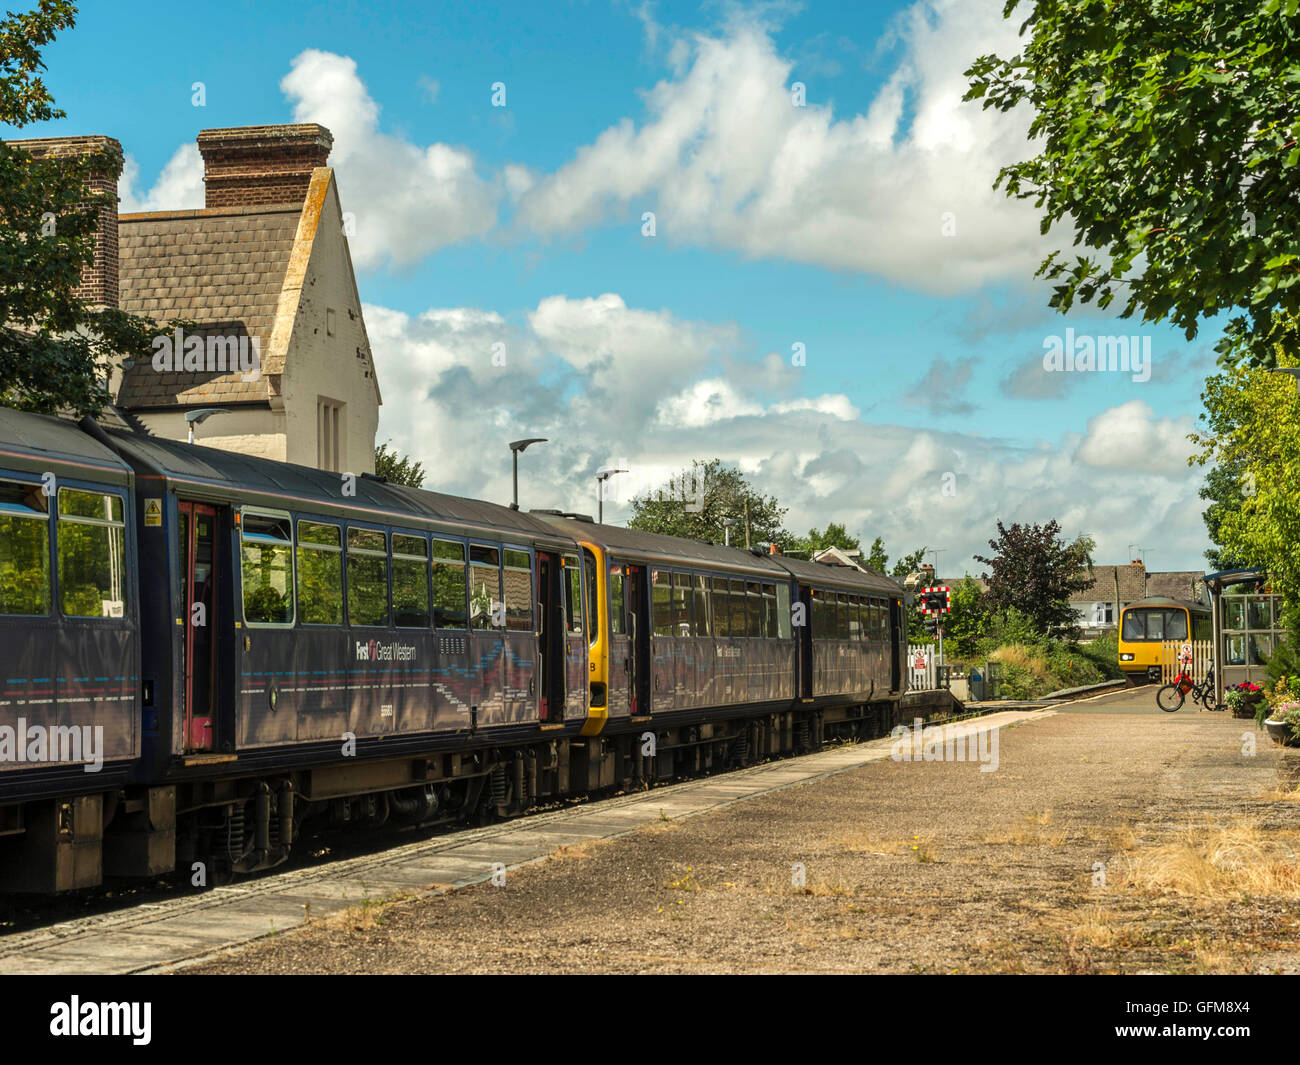 First Great Western Train arrives at Topsham station bound for Exeter traveling along the picturesque Avocet coastal line. Stock Photo